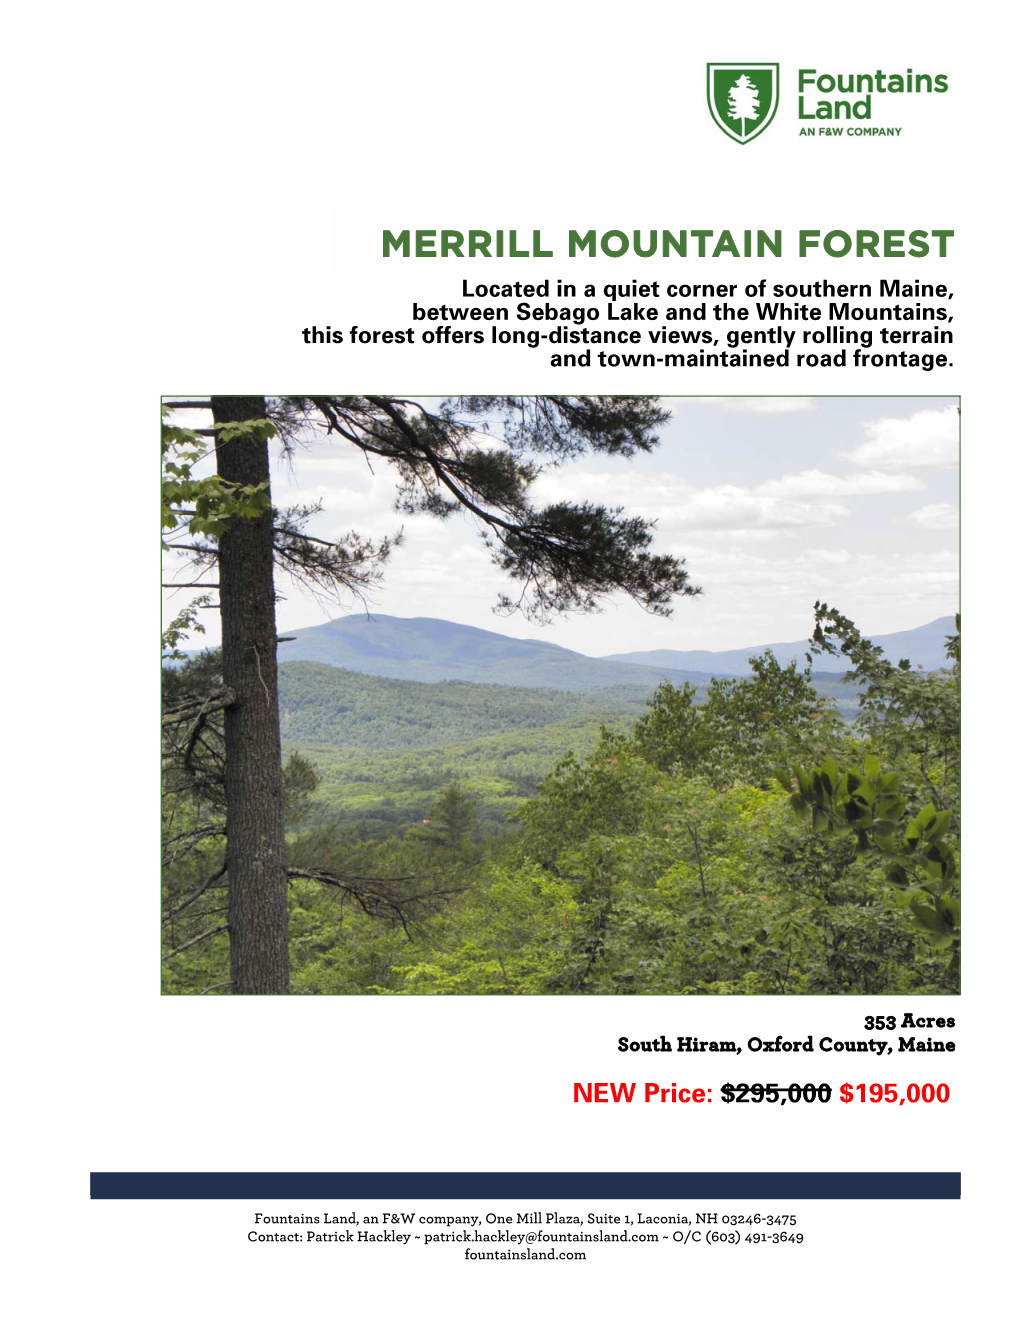 Merrill Mountain Forest